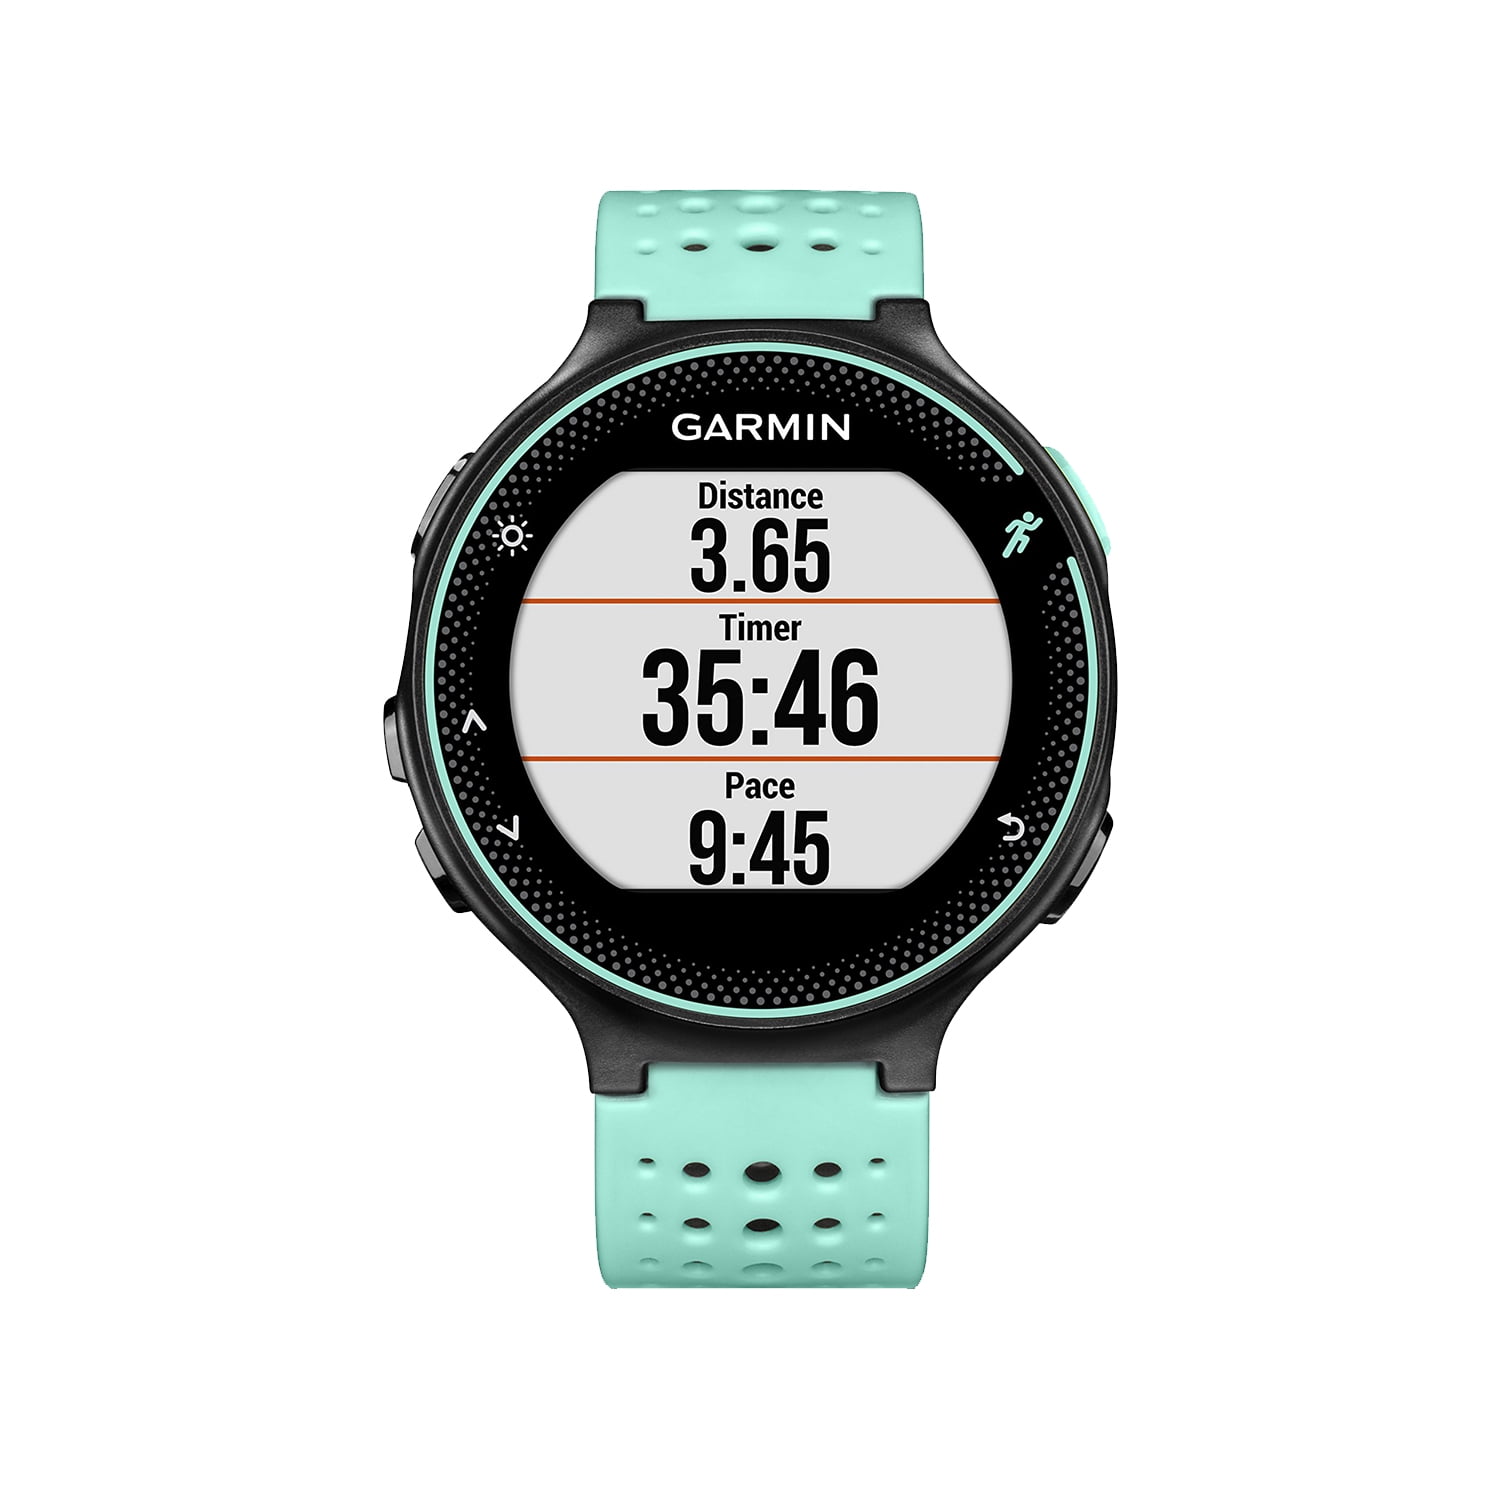 Garmin Forerunner 235 review: The best watch for casual and